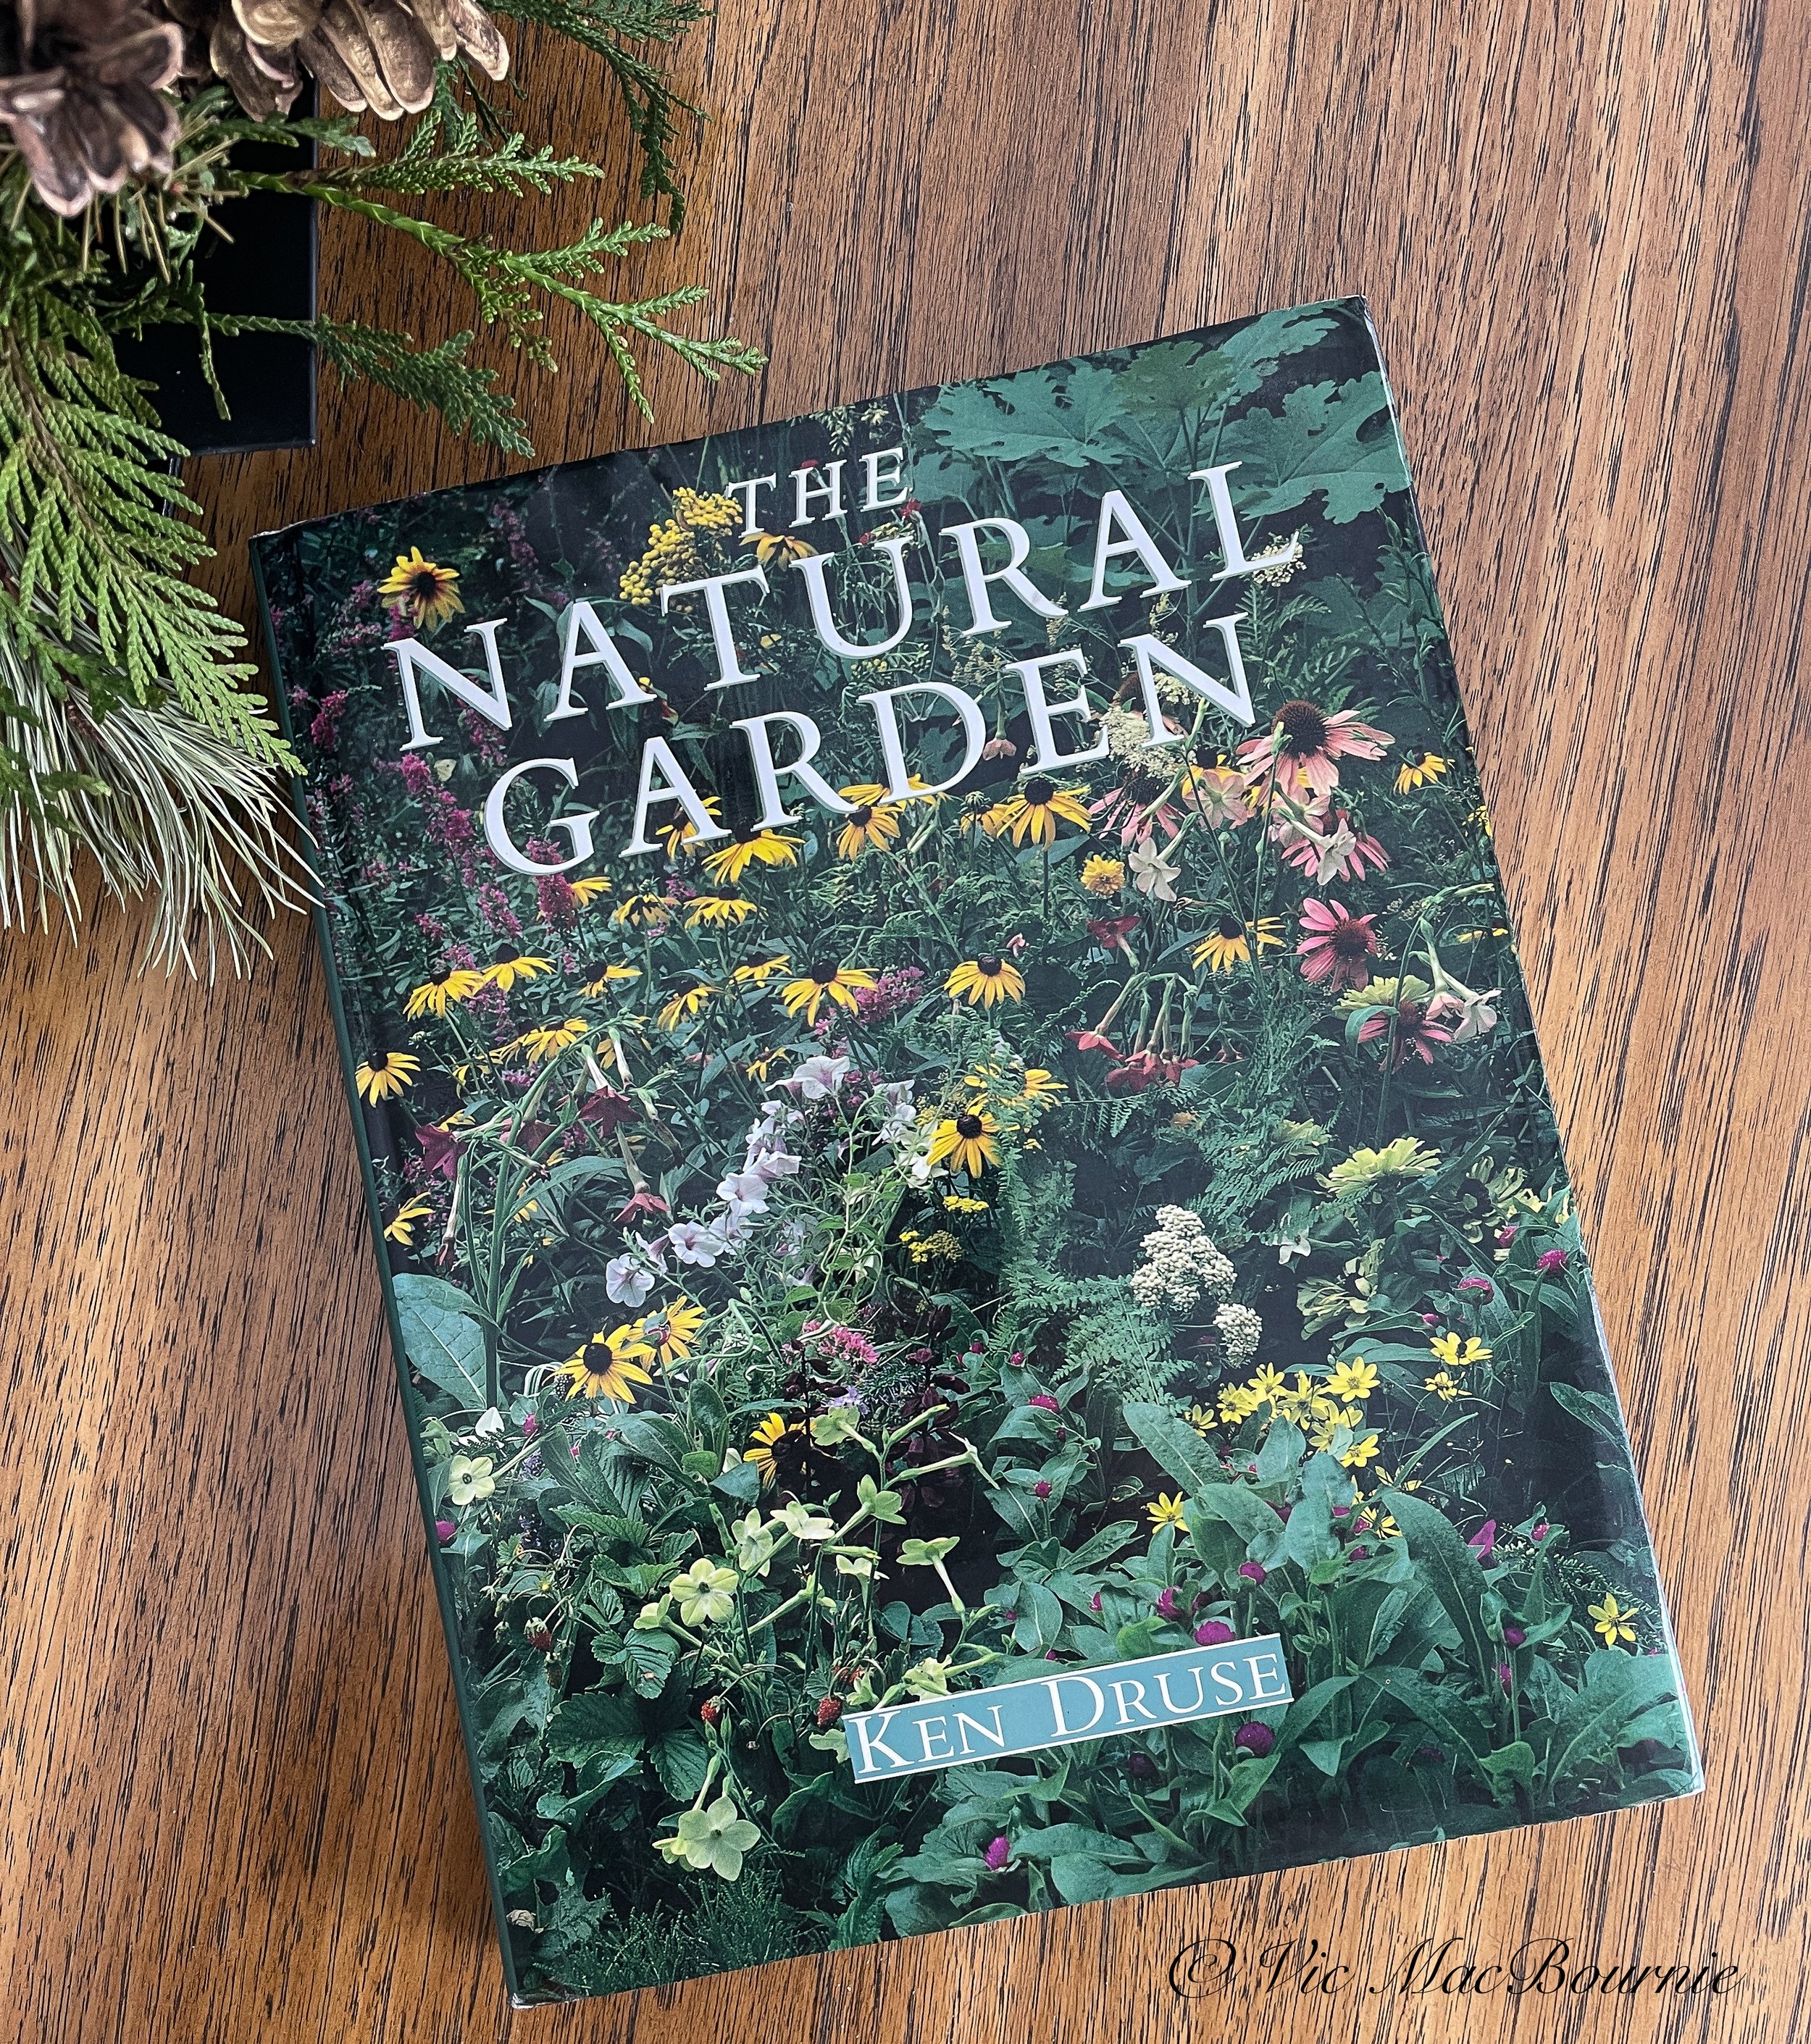 The Natural Garden by Ken Druse continues to be an important book for gardeners young and old looking for a more environmental approach to gardening.